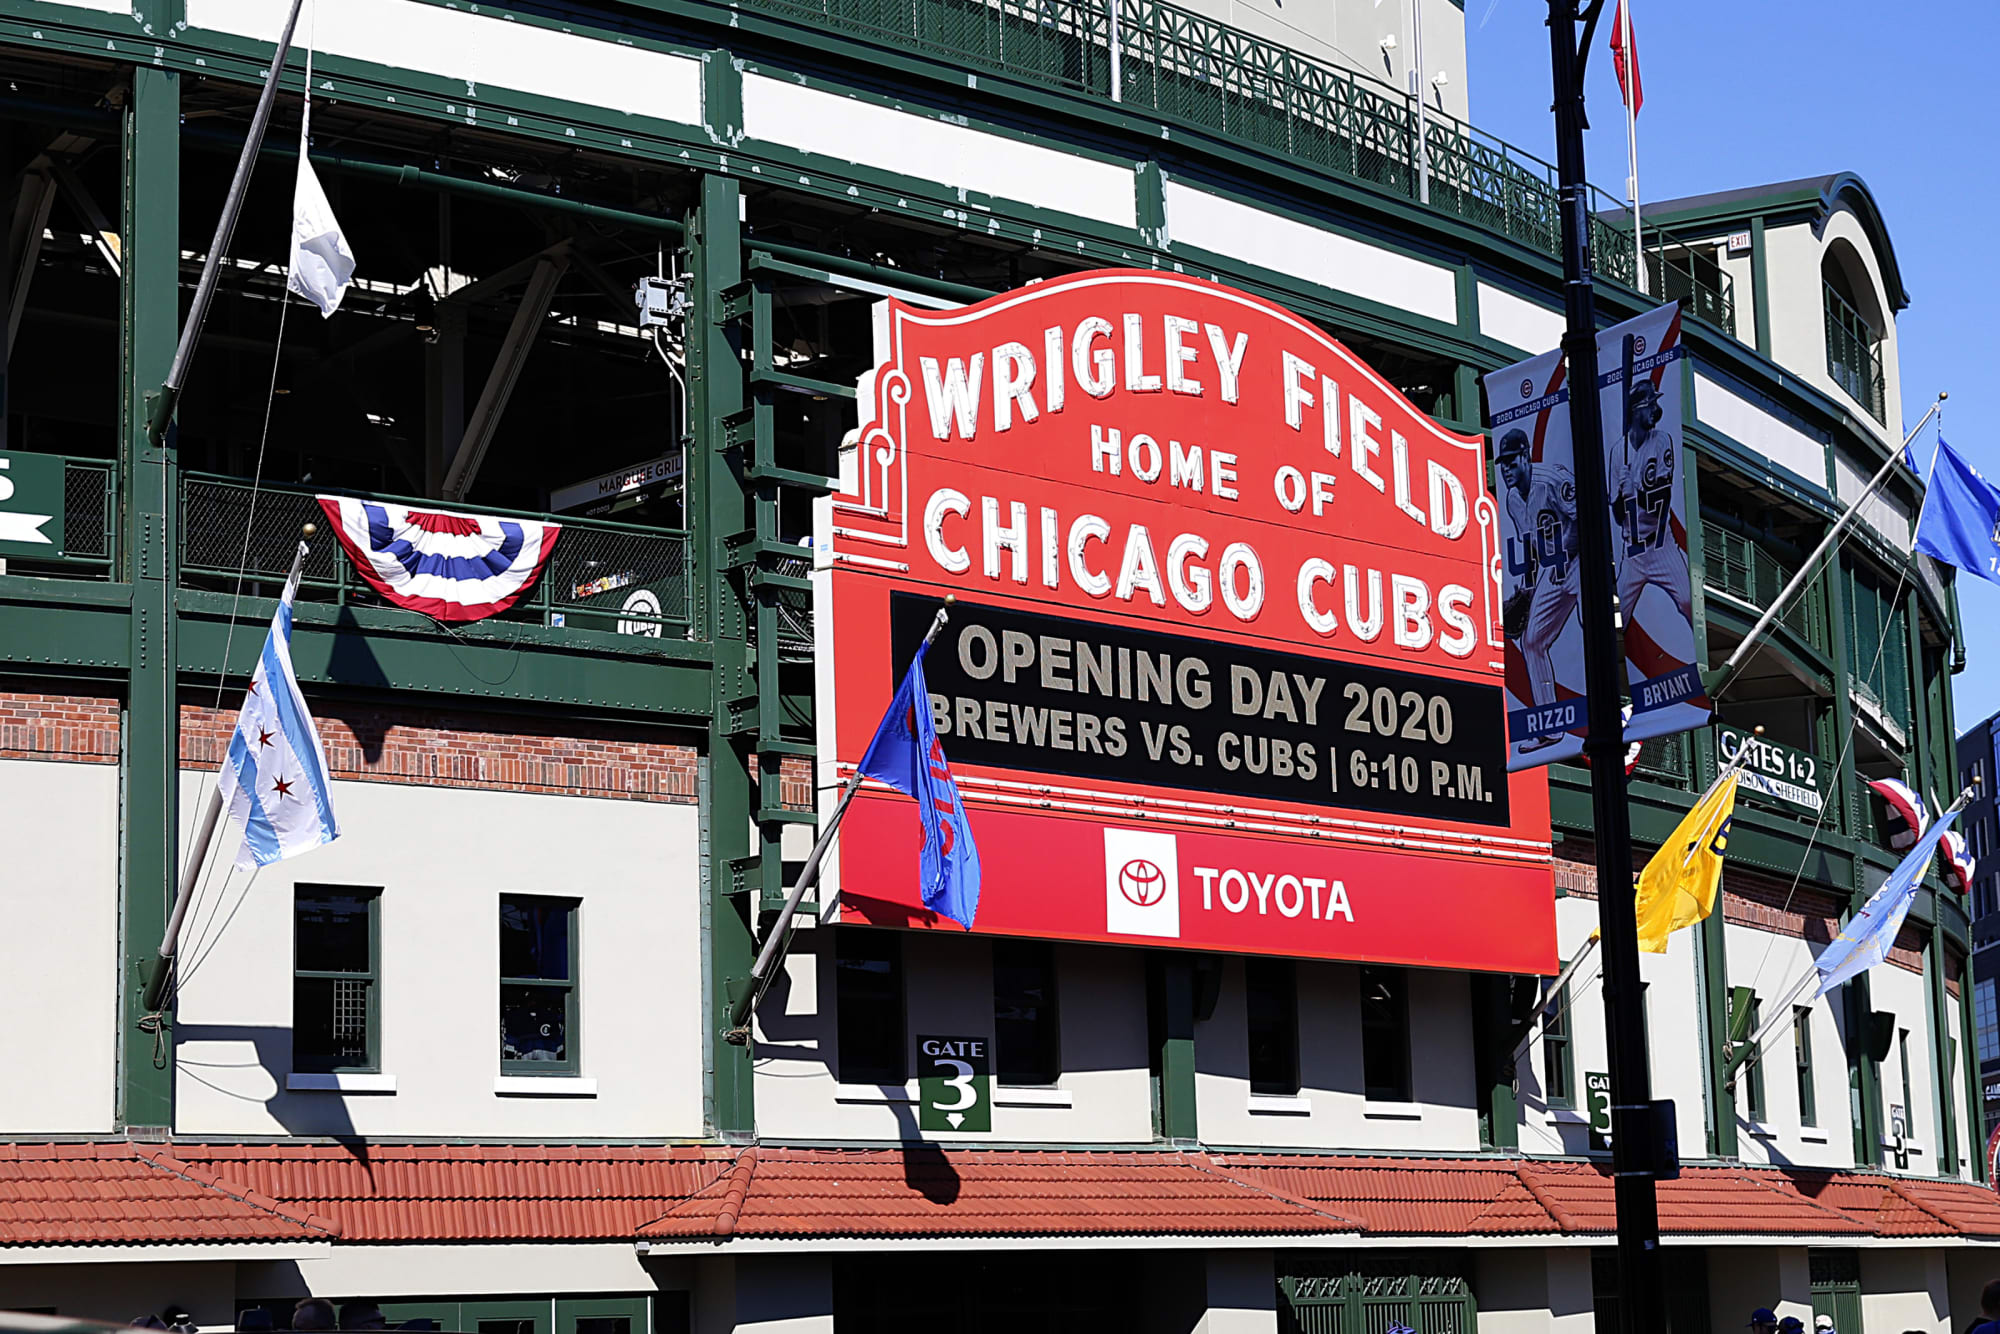 Chicago Cubs Fans at Wrigley Field on Opening Day?